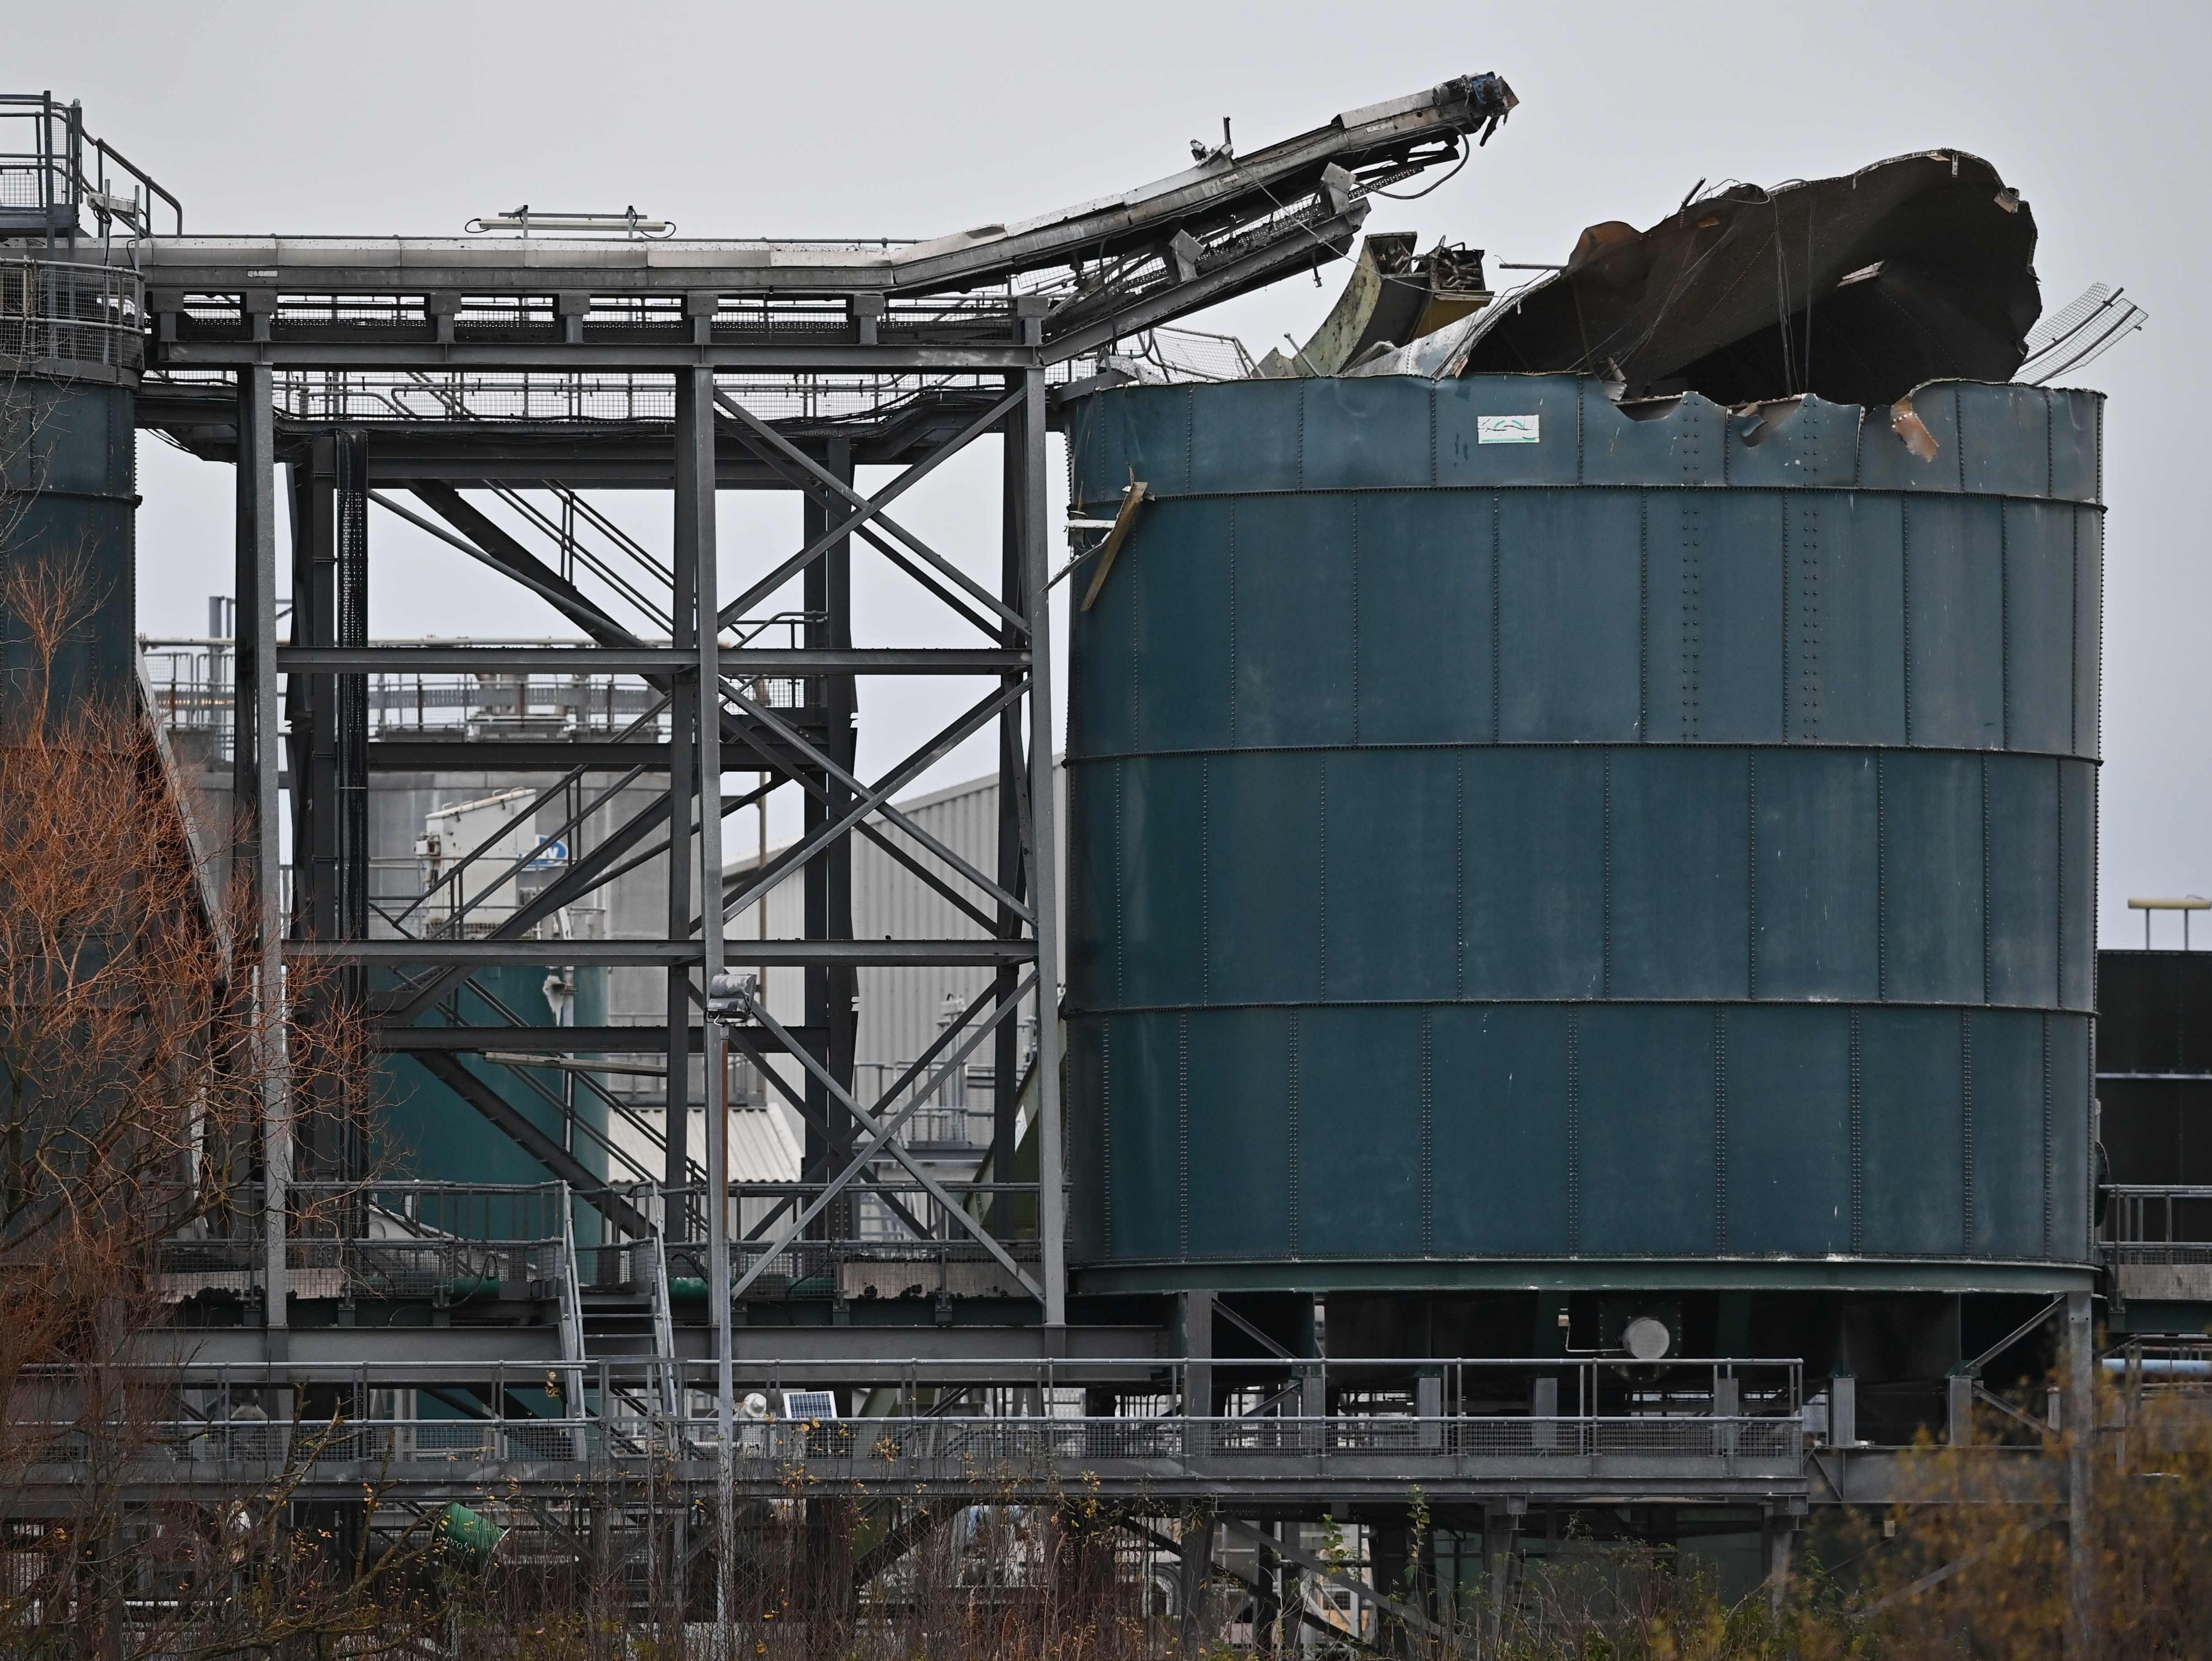 A silo at the plant was damaged in the blast